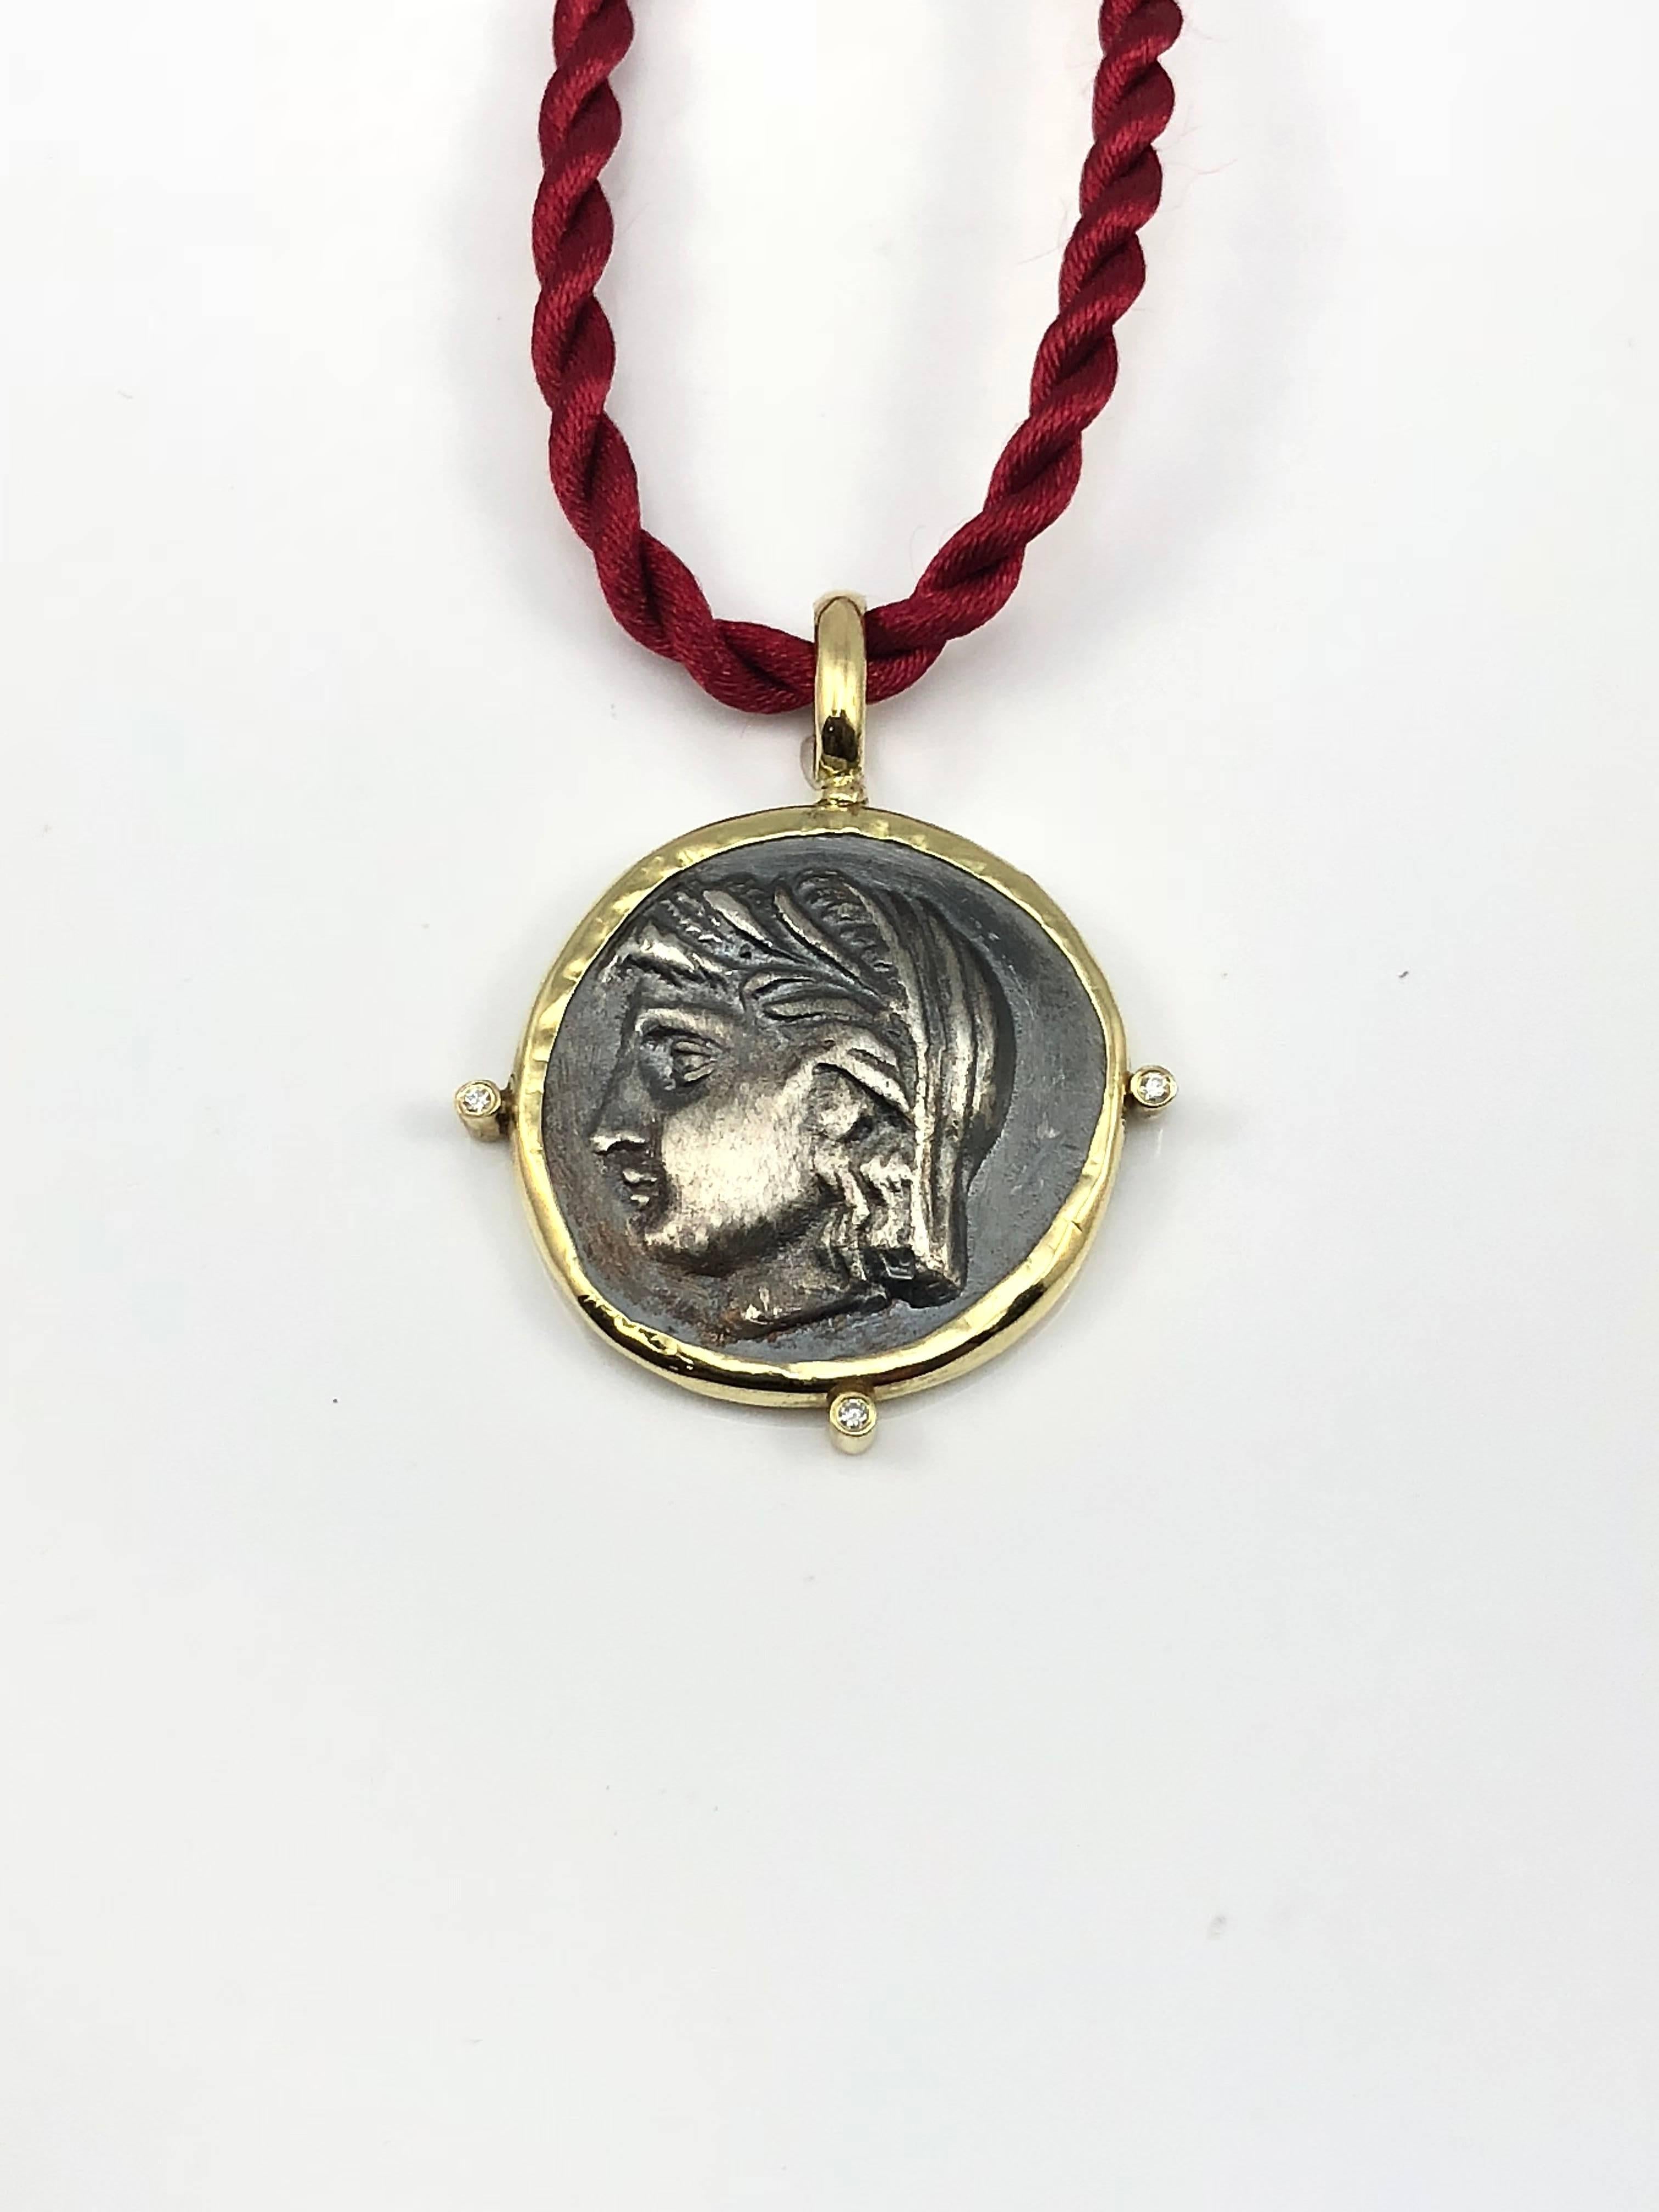 S.Georgios designer 18 Karat Yellow Gold handmade Coin Pendant Necklace featuring 6 Brilliant cut Diamonds (3 on the front side and 3 on the backside) total weight of 0.06 Carat and a replica of an Ancient Greek Coin of Dimitra in Silver 925. The